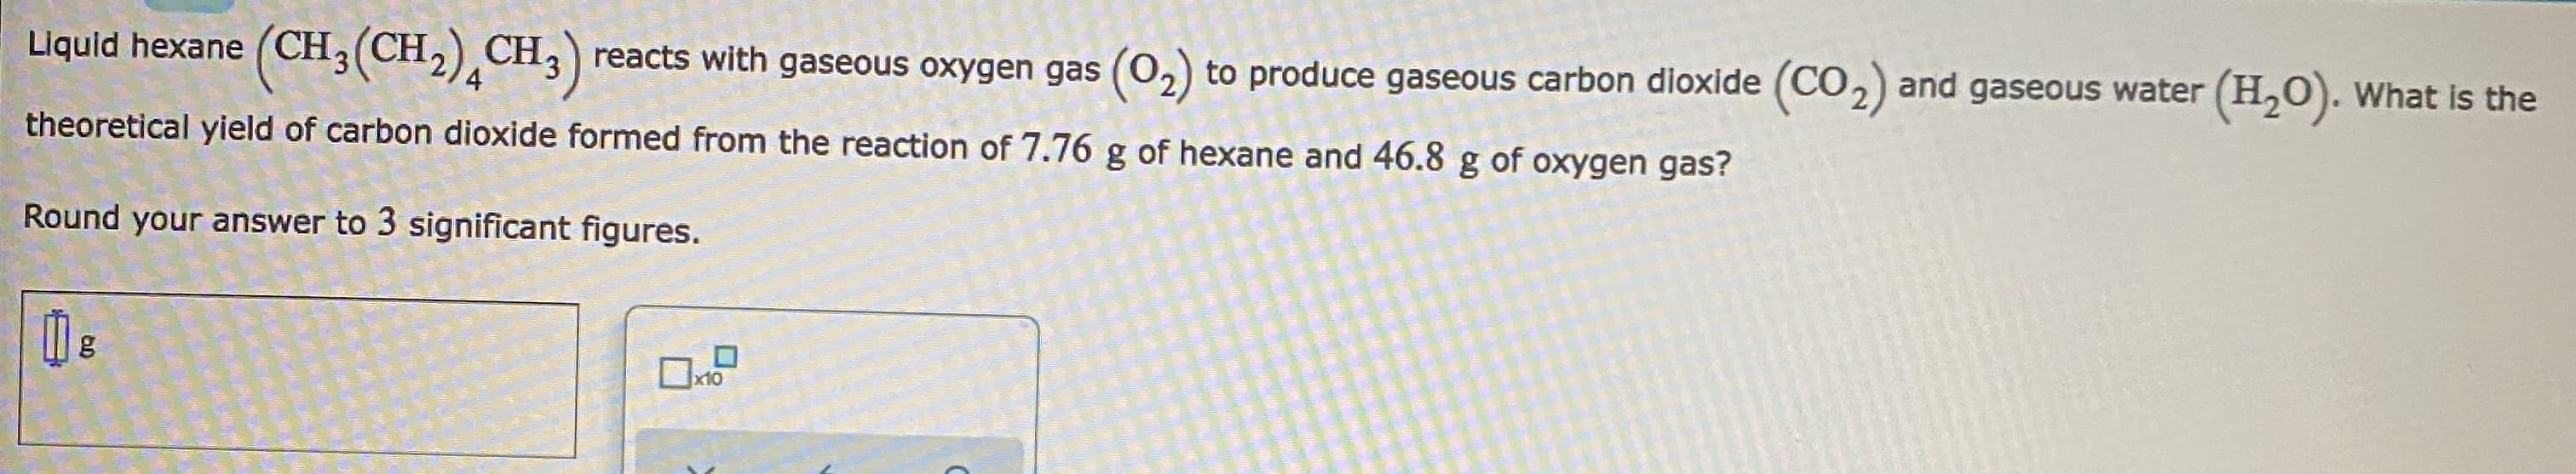 Liquid hexane (CH3 (CH,)¸CH;)
reacts with gaseous oxygen gas (02) to produce gaseous carbon dioxide (CO2) and gaseous water (H,0). What is the
theoretical yield of carbon dioxide formed from the reaction of 7.76 g of hexane and 46.8 g of oxygen gas?
Round your answer to 3 significant figures.
